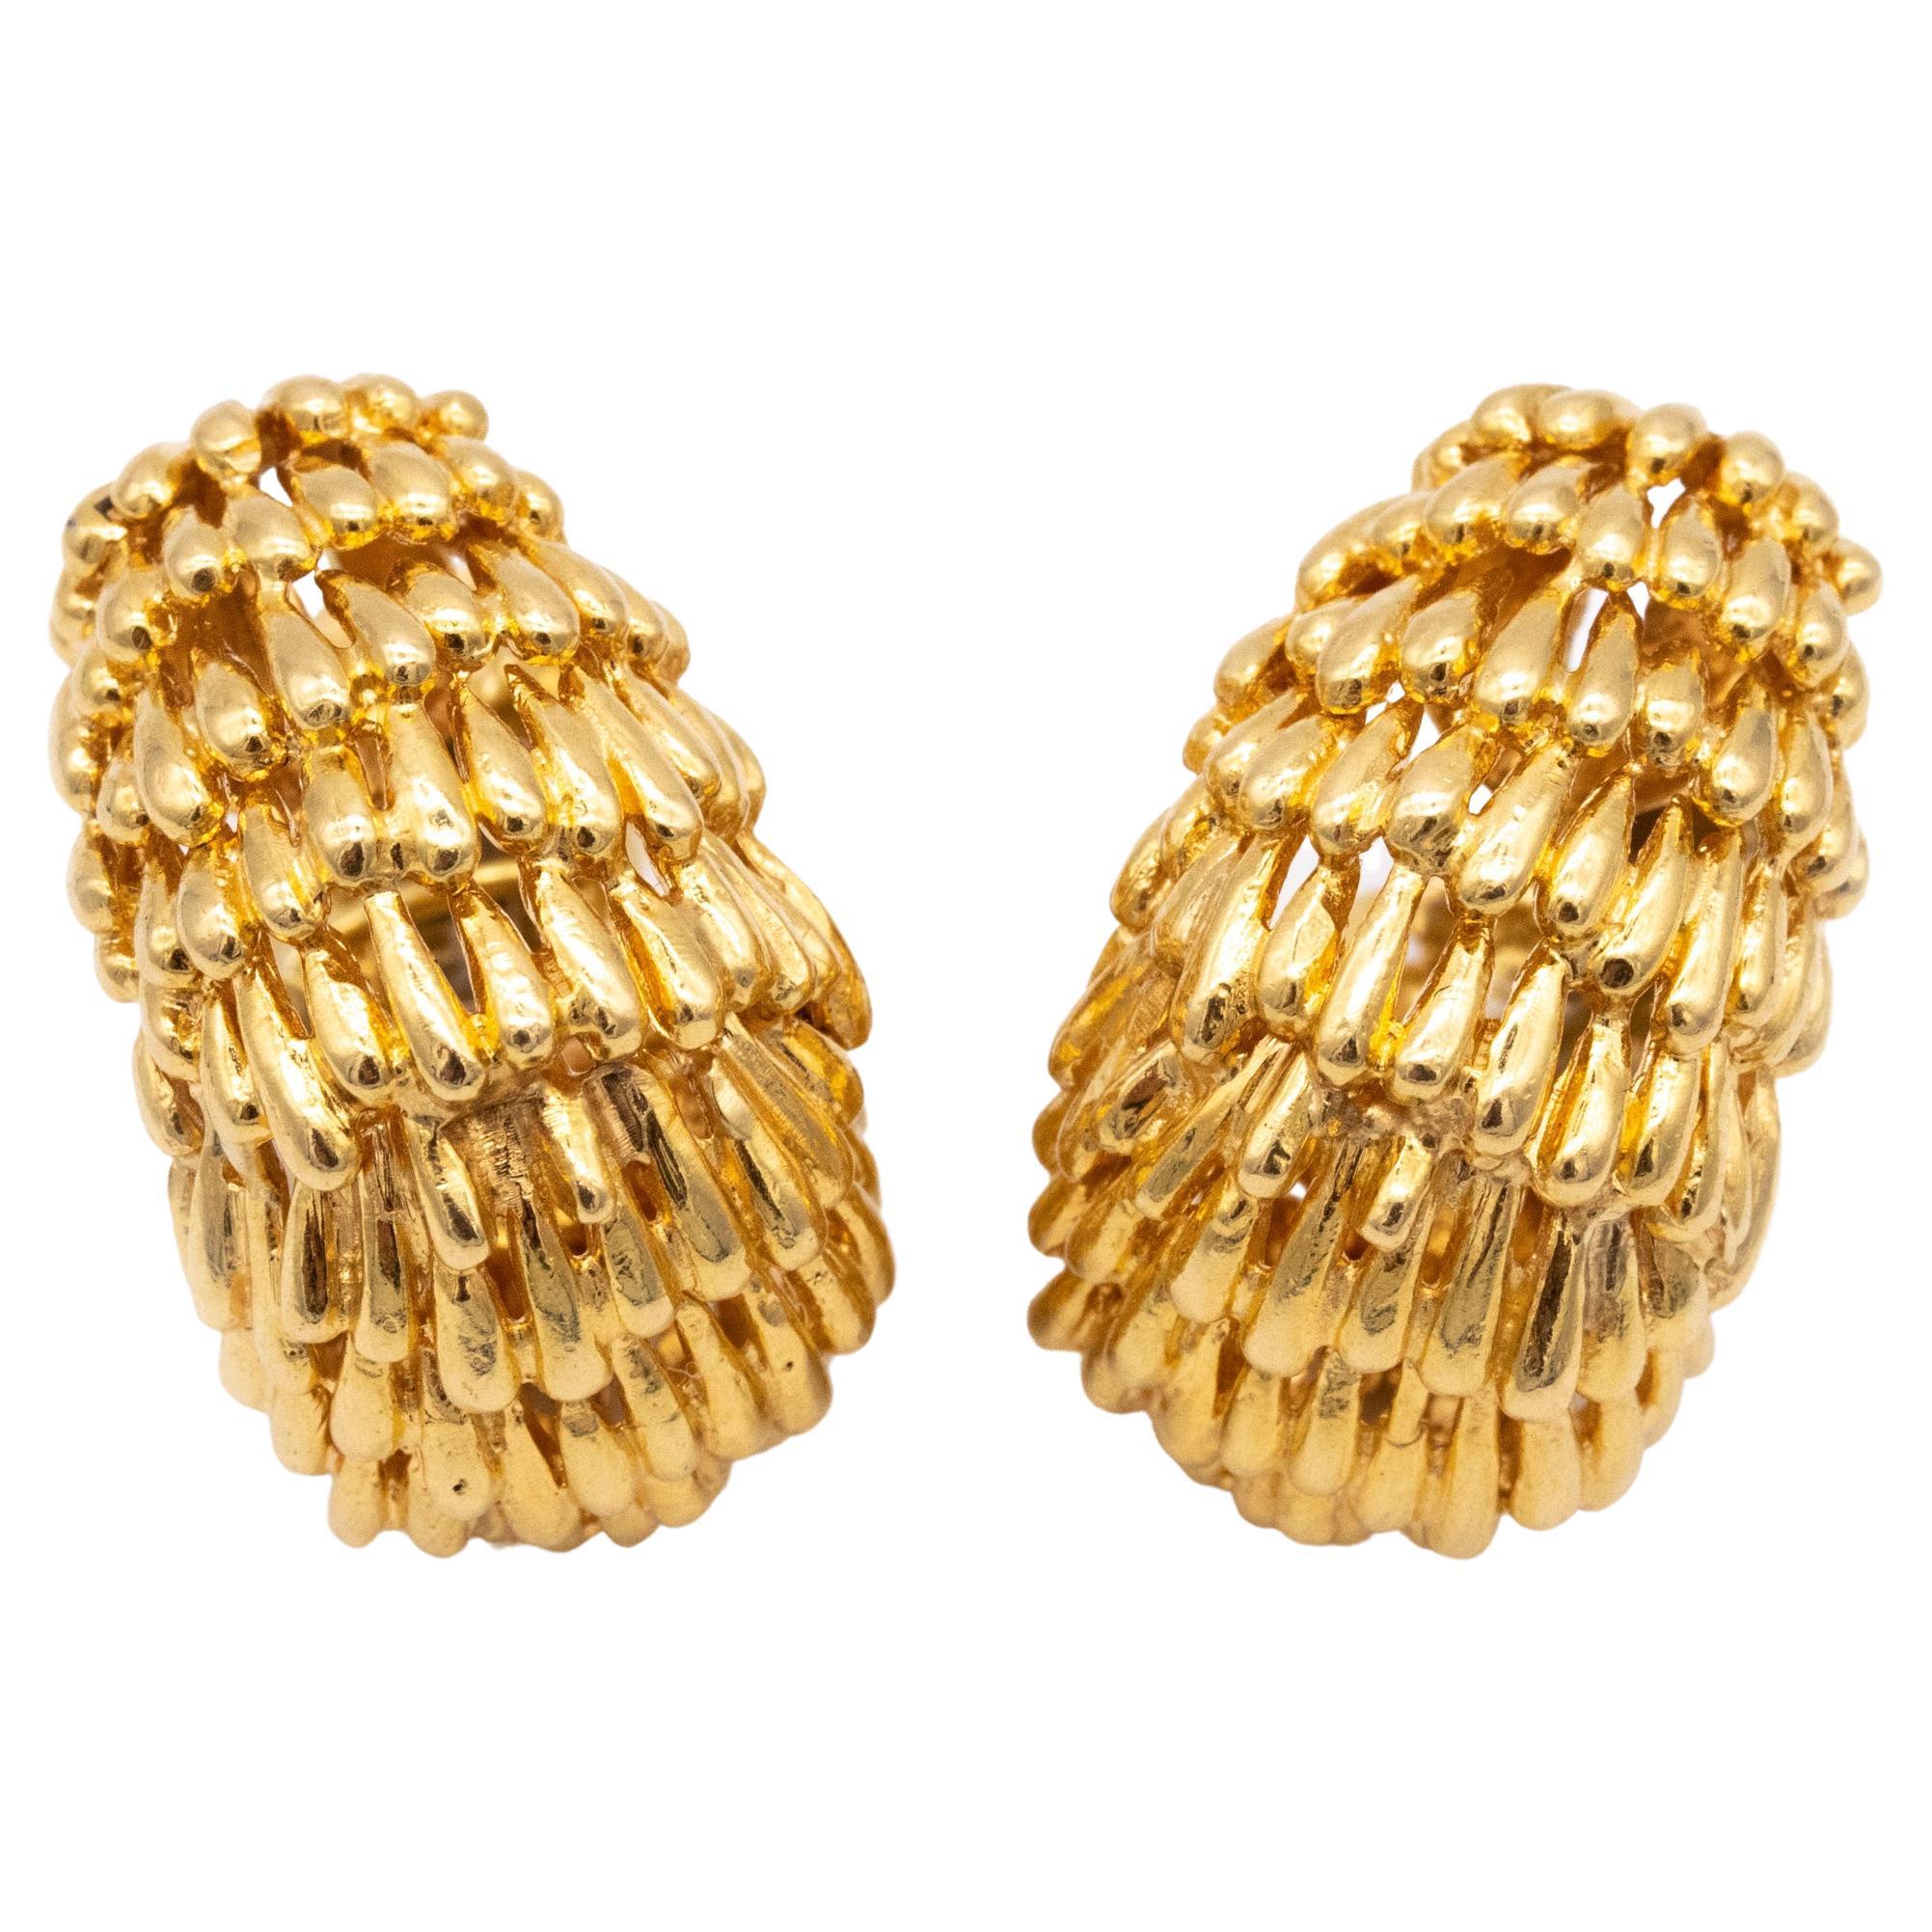 David Webb 1970 New York Classic Clips Earrings in Textured 18Kt Yellow Gold